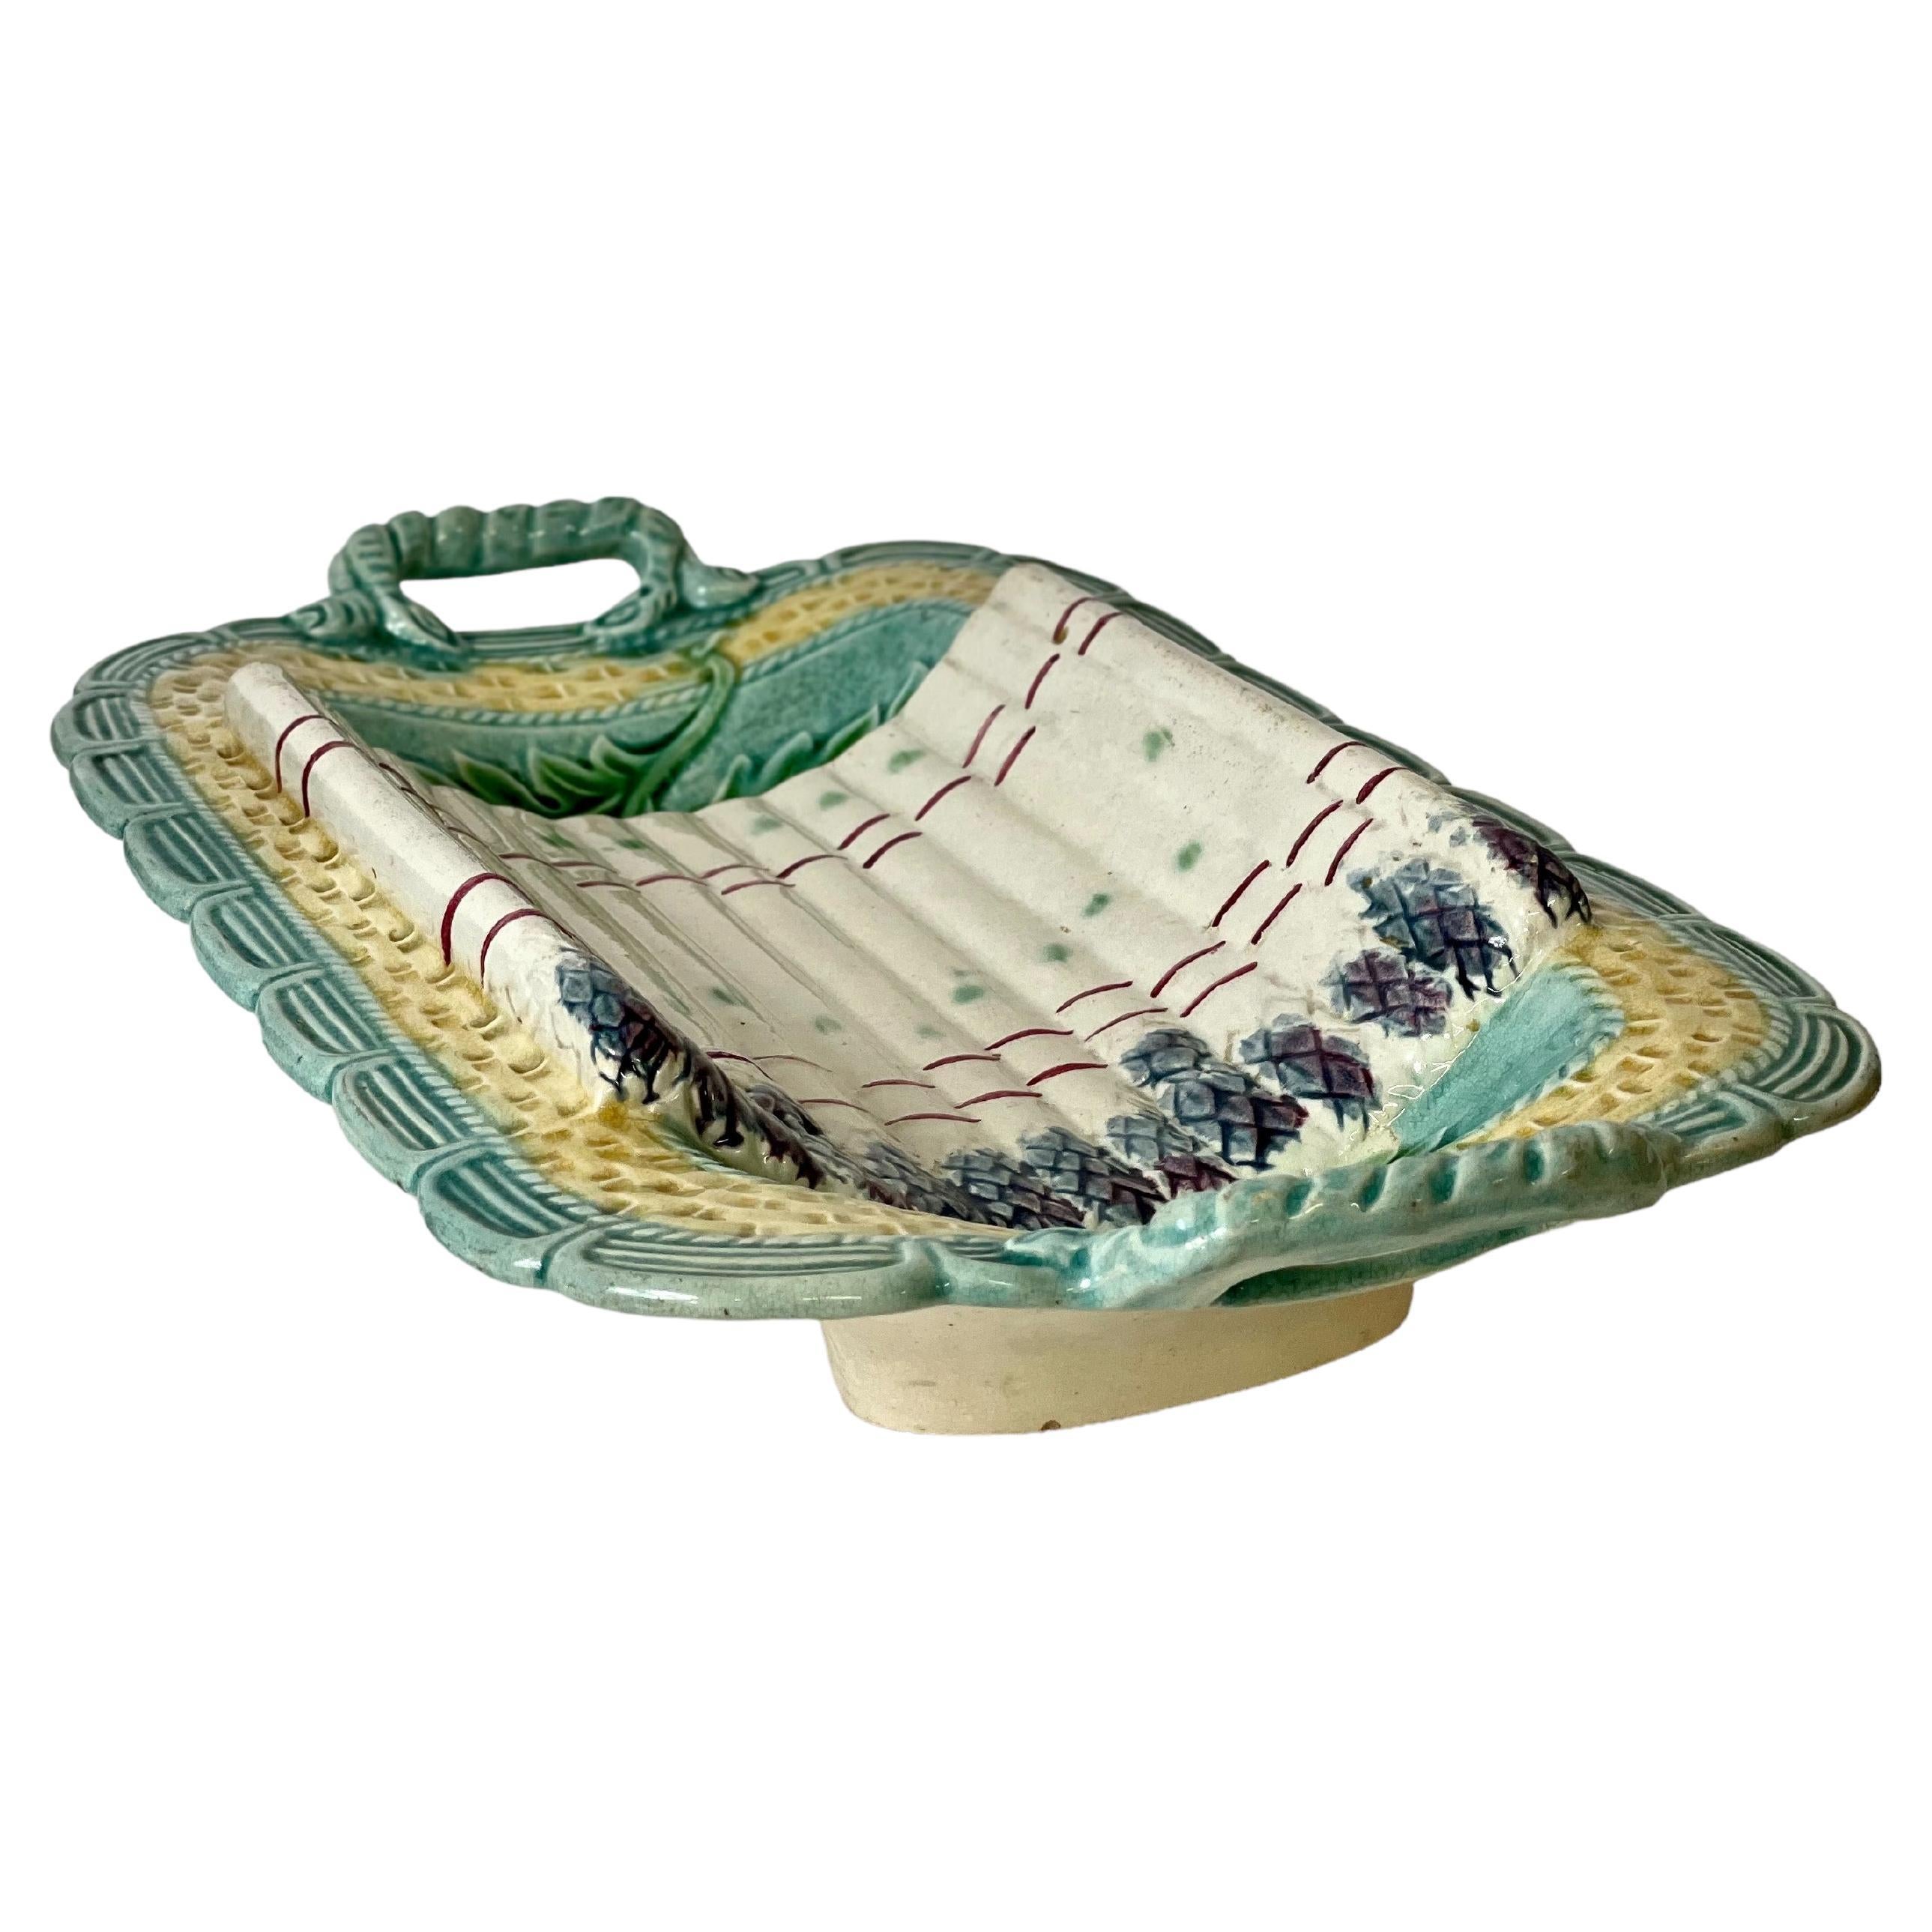 A wonderful late 19th century French glazed 'Barbotine' Majolica asparagus serving platter with handles, wonderfully decorated in vibrant pastel colours, with haut-relief modelled and glazed asparagus stalks against a woven wicker pattern and a